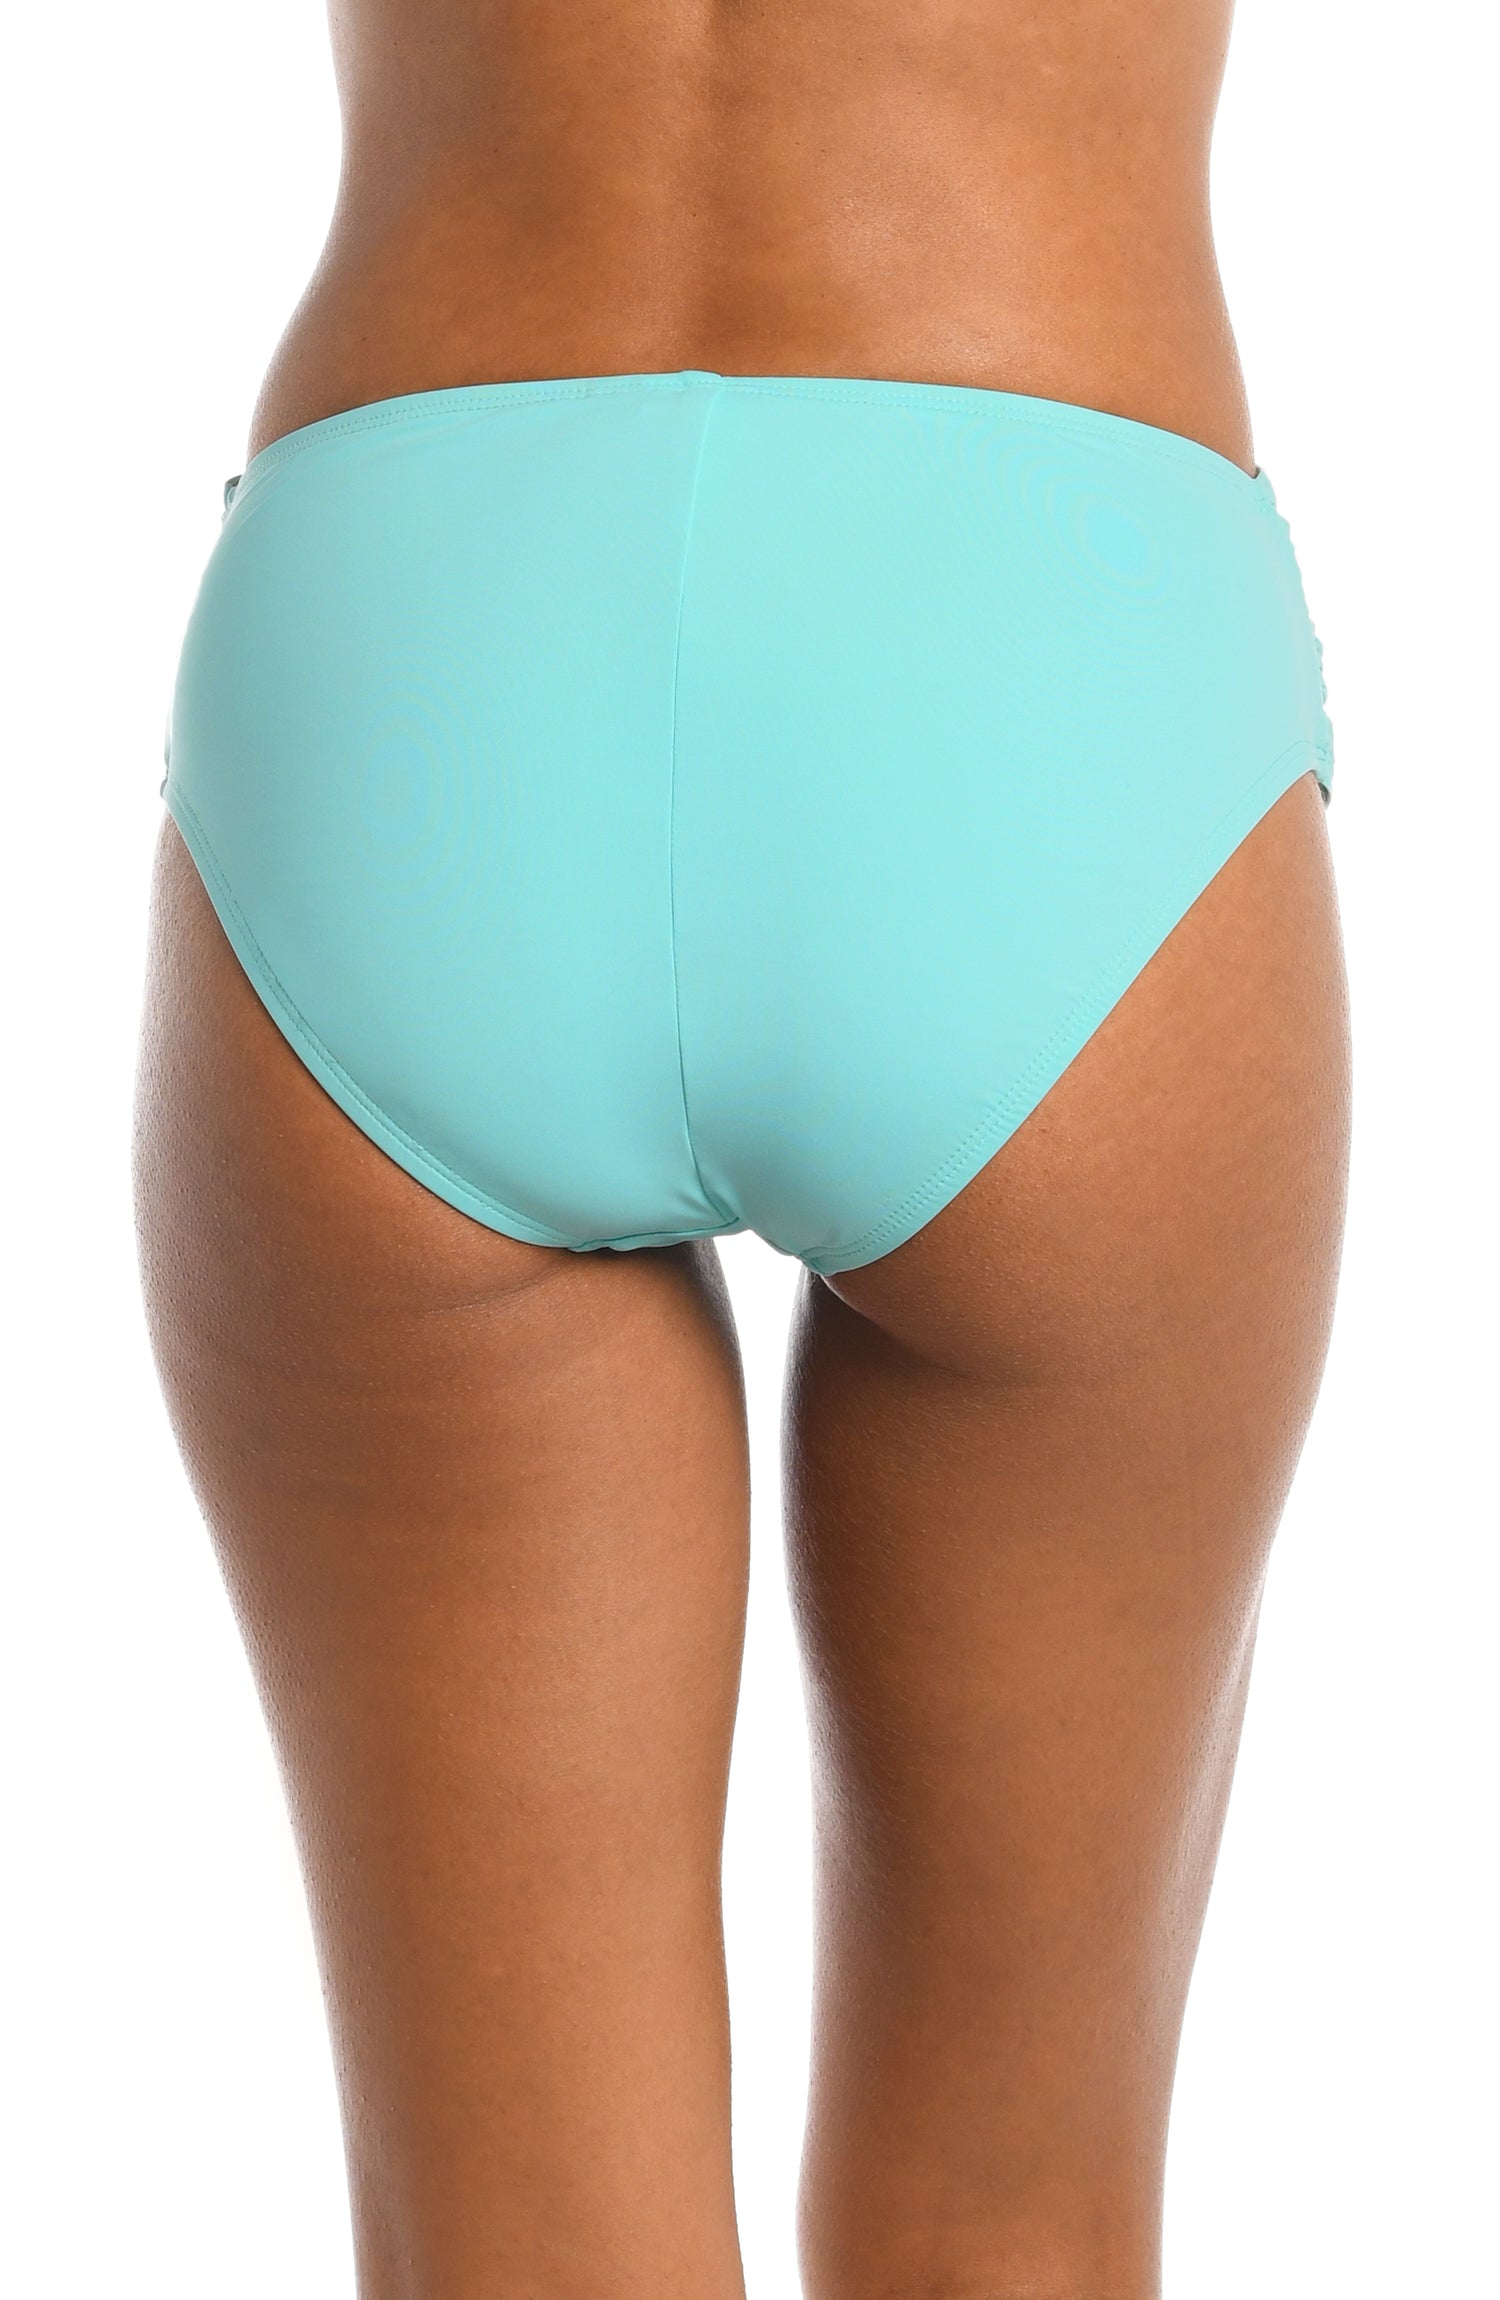 Model is wearing a ice blue colored mid-waist swimsuit bottom from our Best-Selling Island Goddess collection.